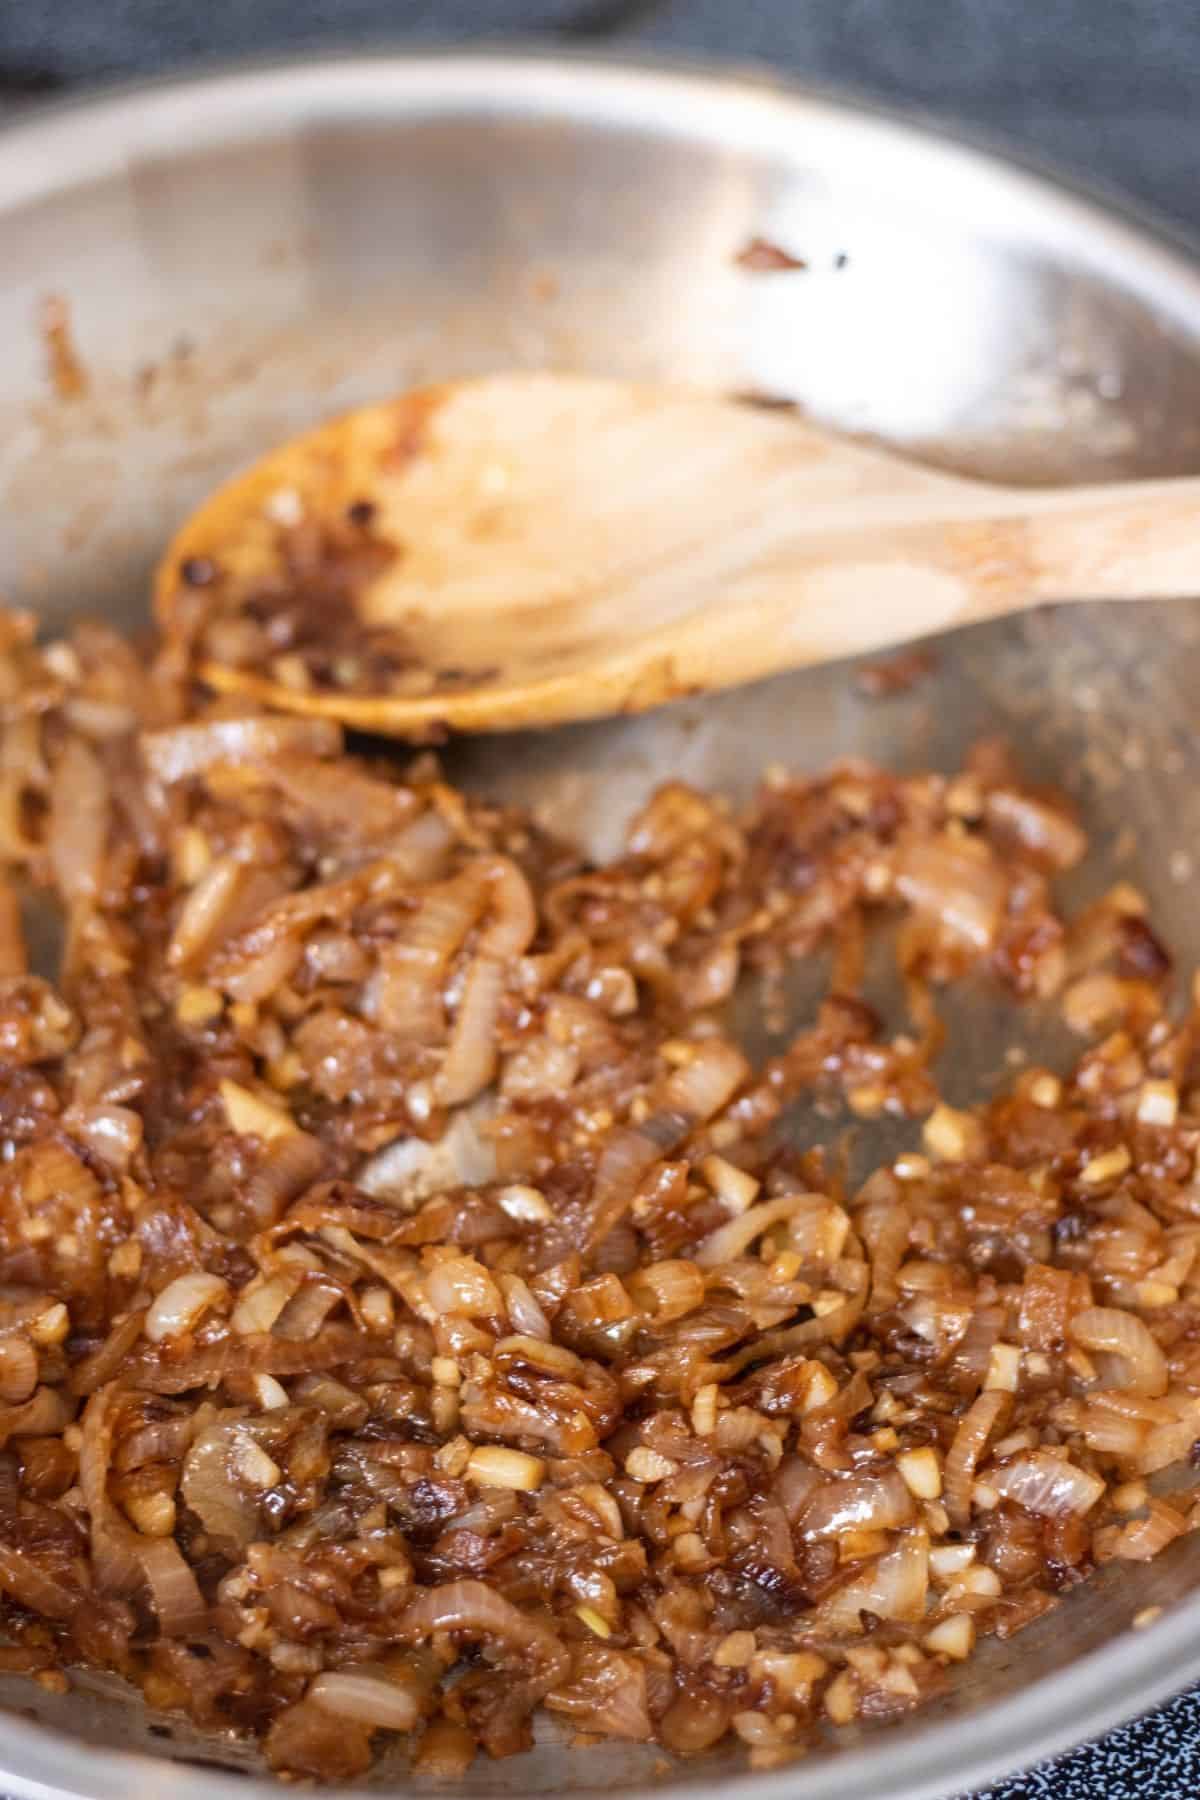 Caramelized shallots in a pan with a wooden spoon